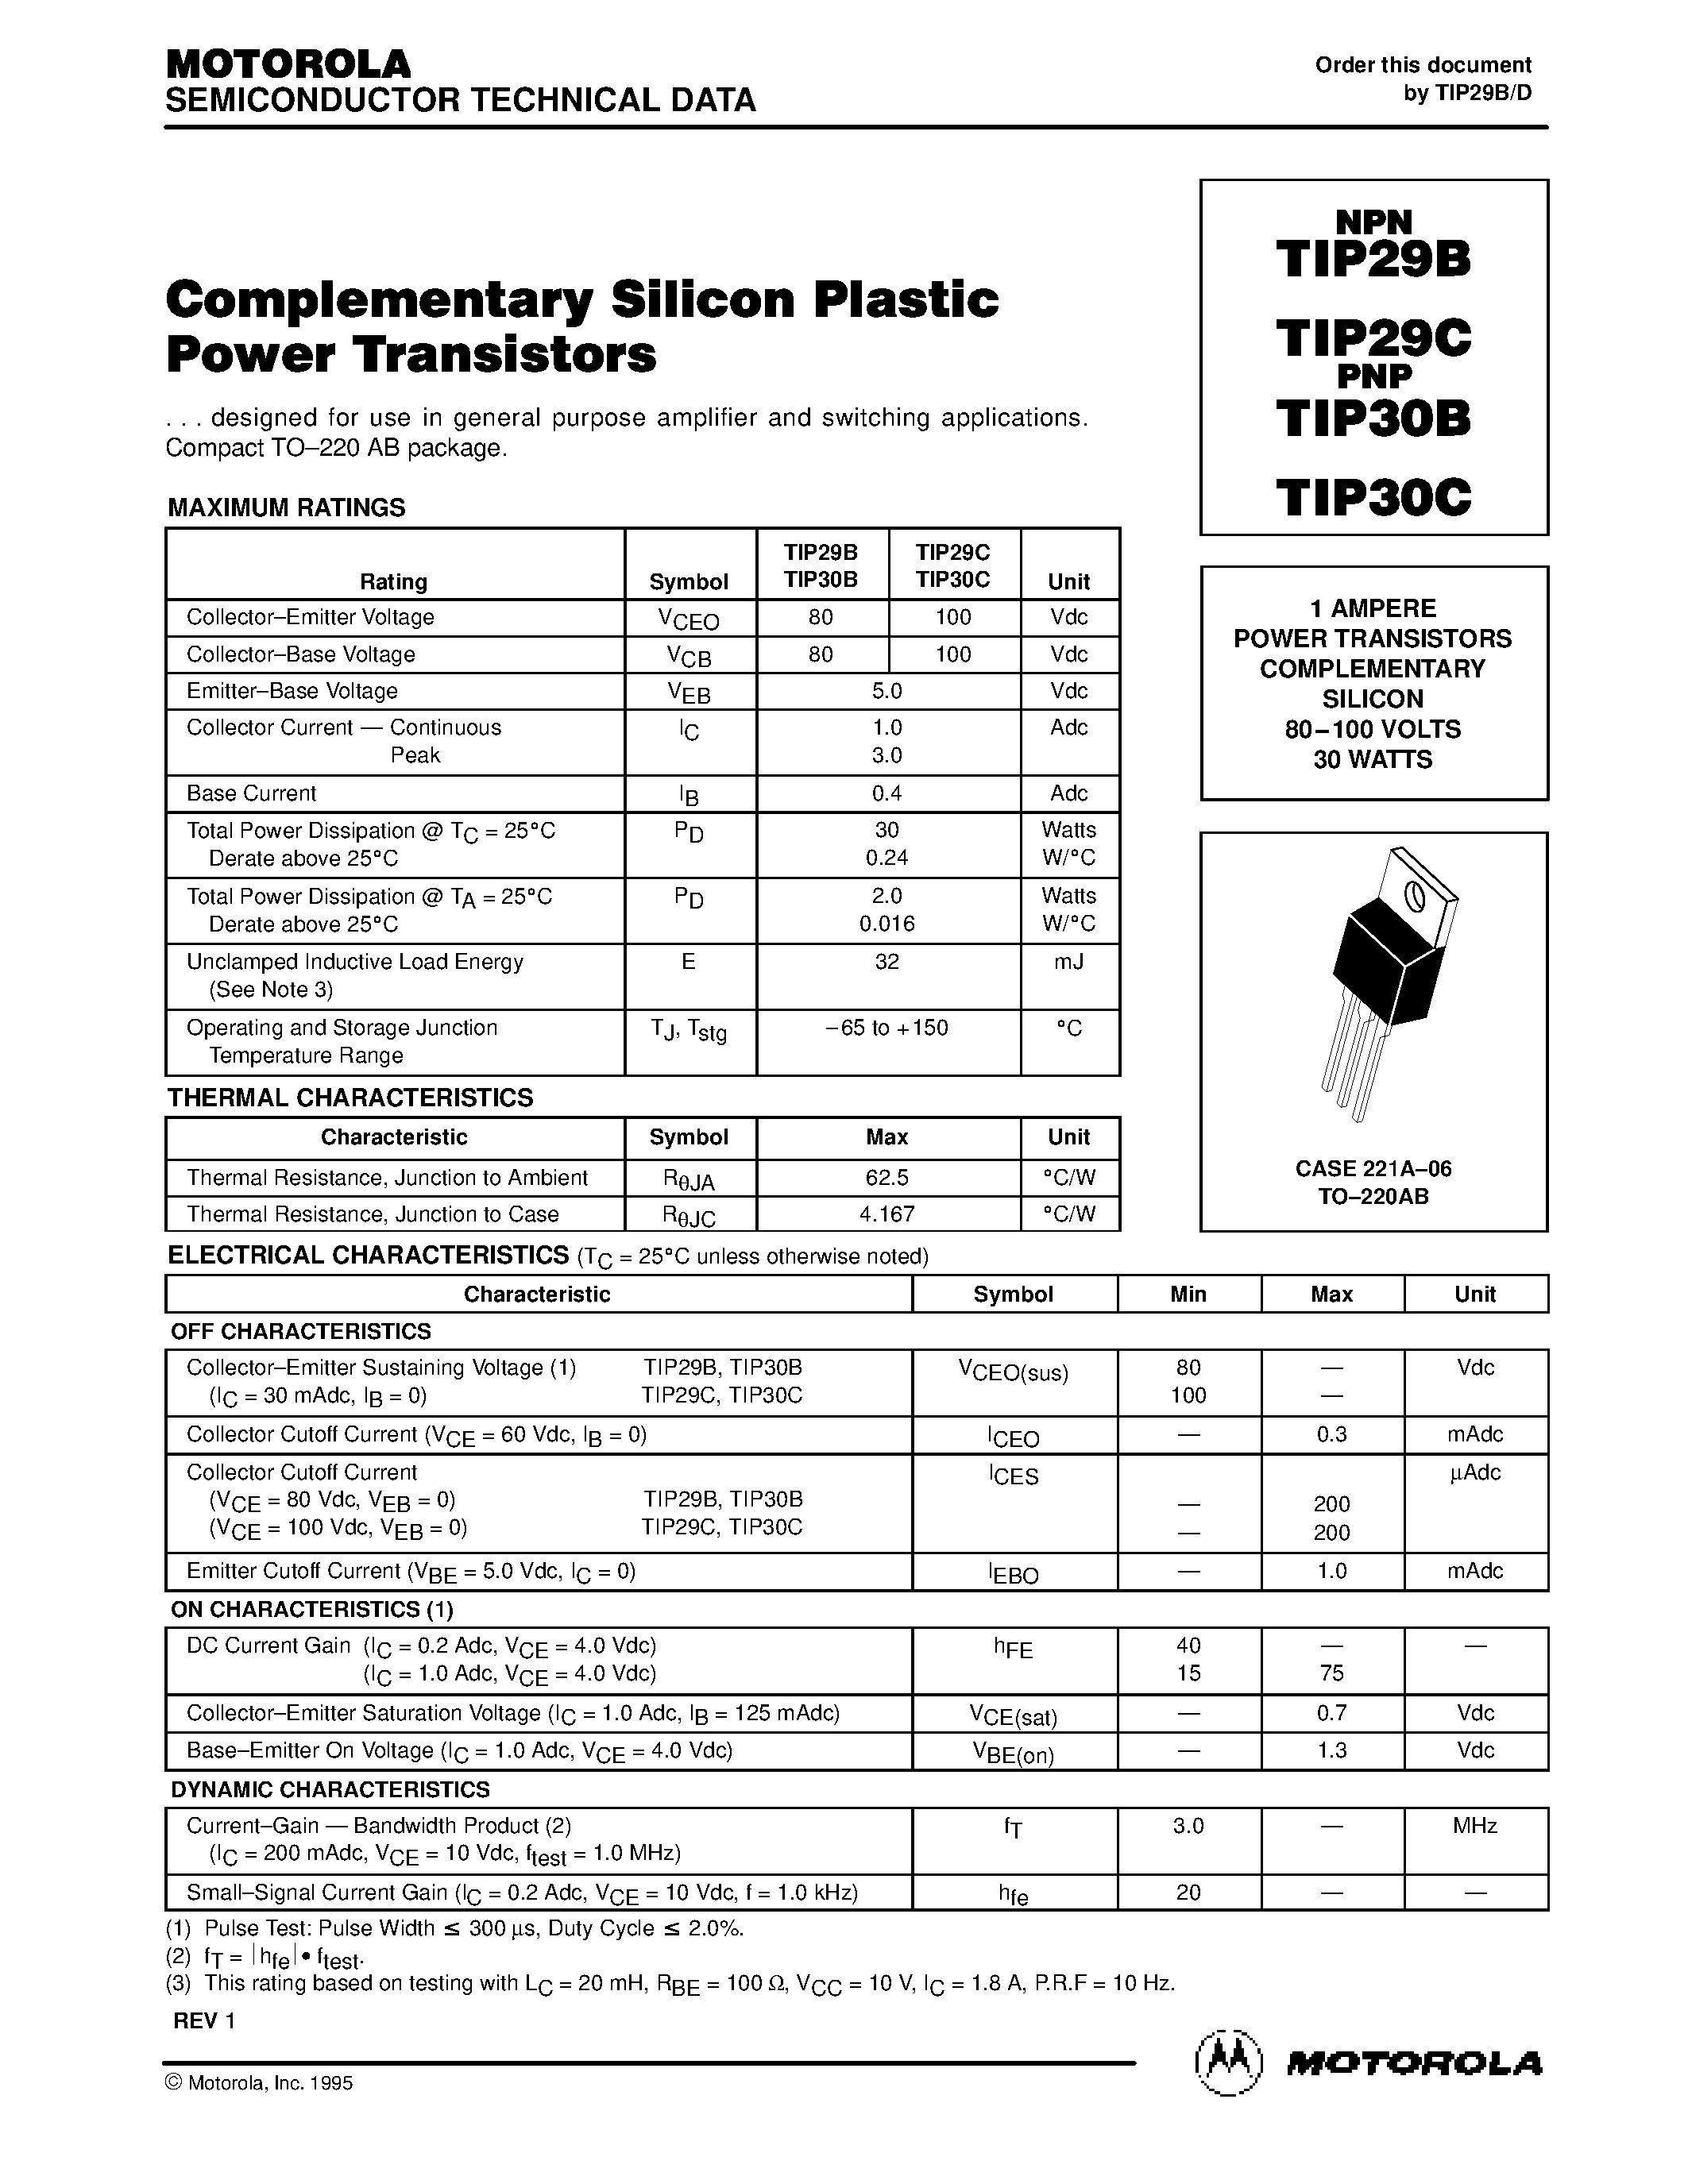 Datasheet TIP30B - 1 AMPERE POWER TRANSISTORS COMPLEMENTARY SILICON 80-100 VOLTS 30 WATTS page 1